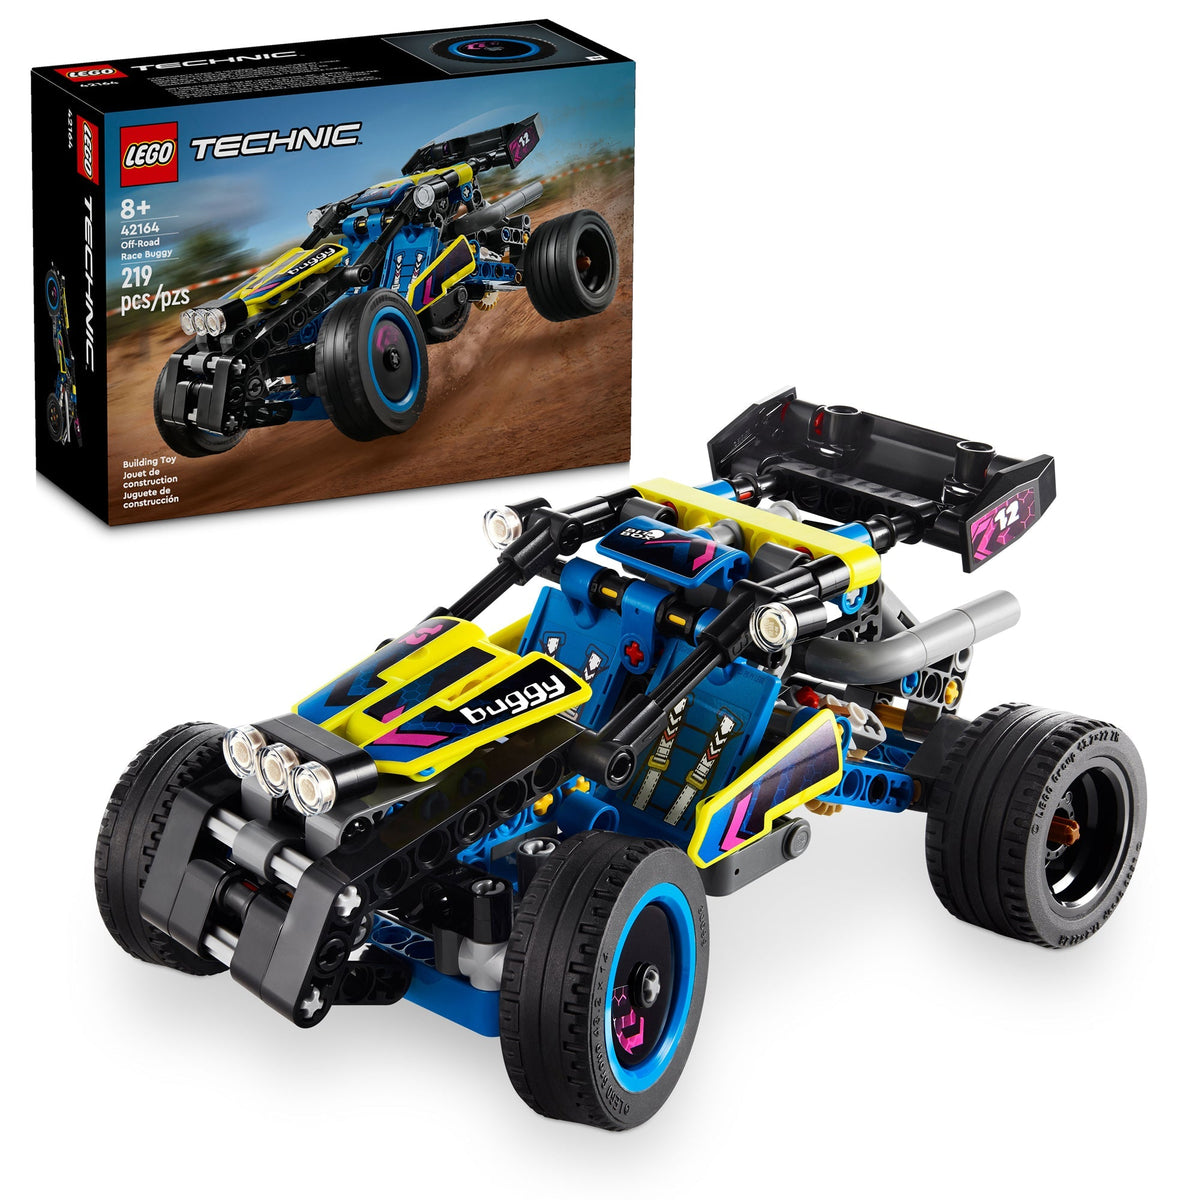 LEGO Toys & Games LEGO Technic Off-Road Race Buggy, 42164, Ages 8+, 219 Pieces